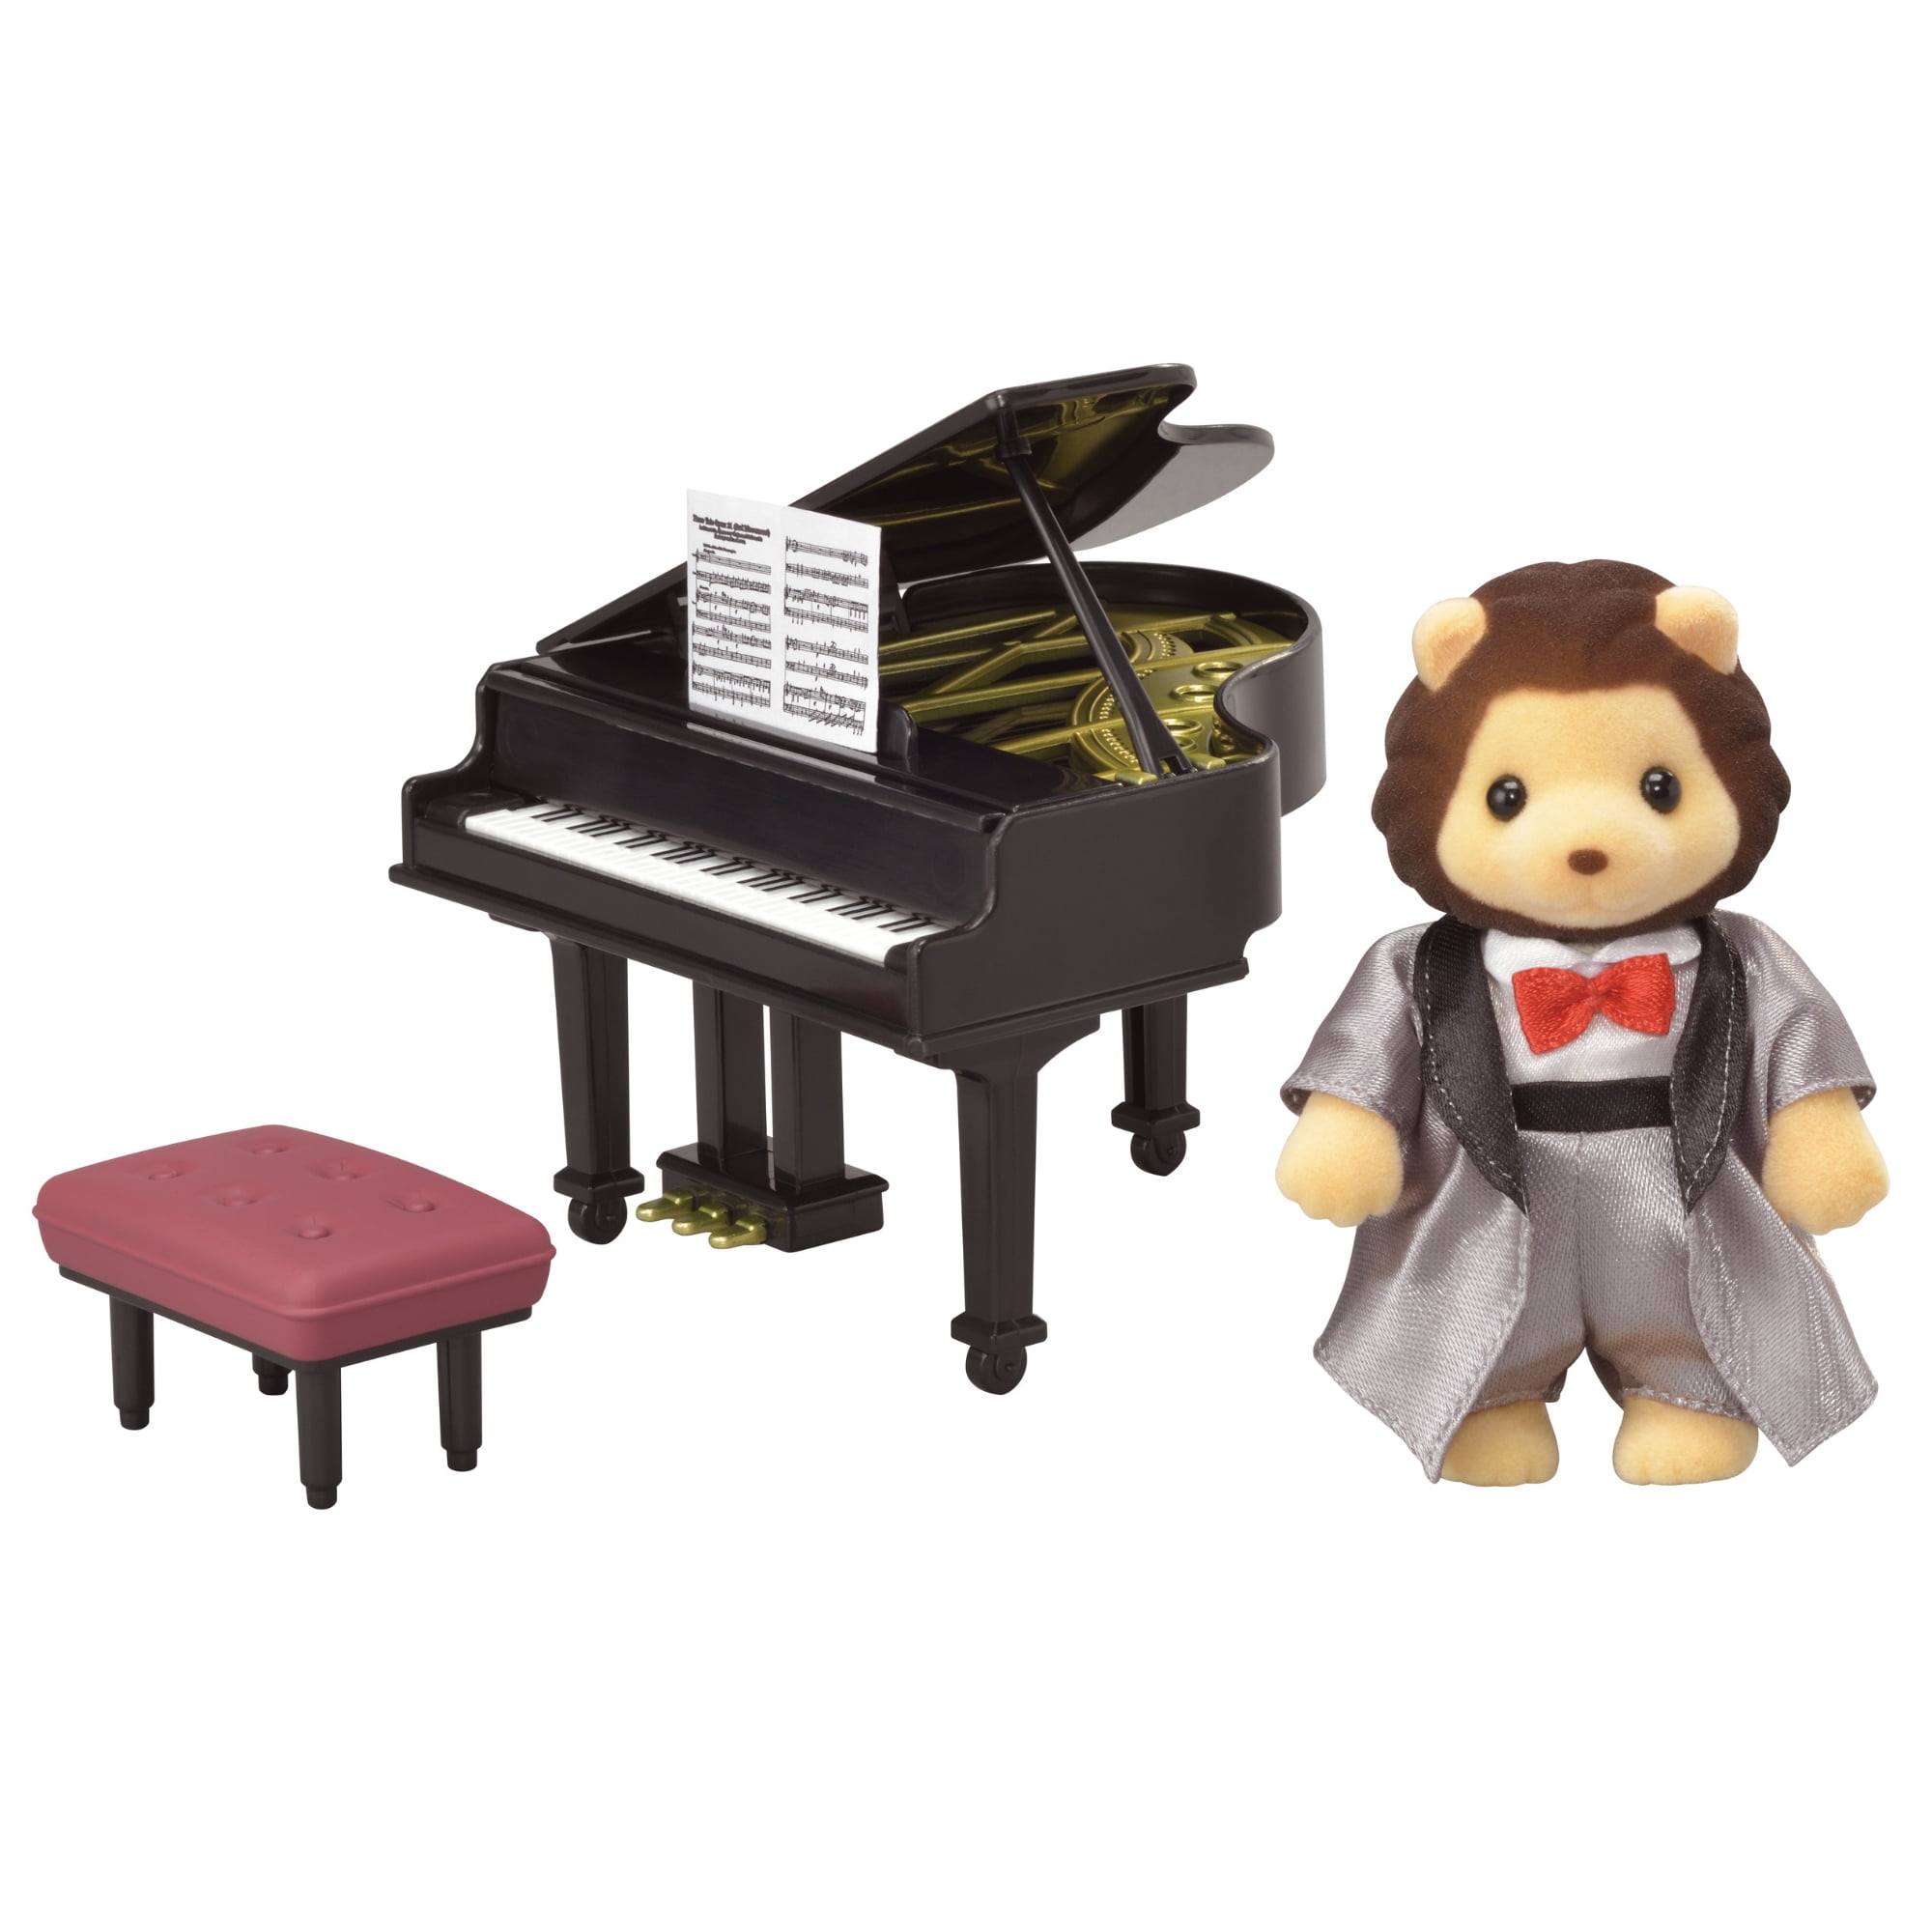 Calico Crittes Town Series Grand Piano Concert Set, Dollhouse with Figure and Musical Accessories Walmart.com